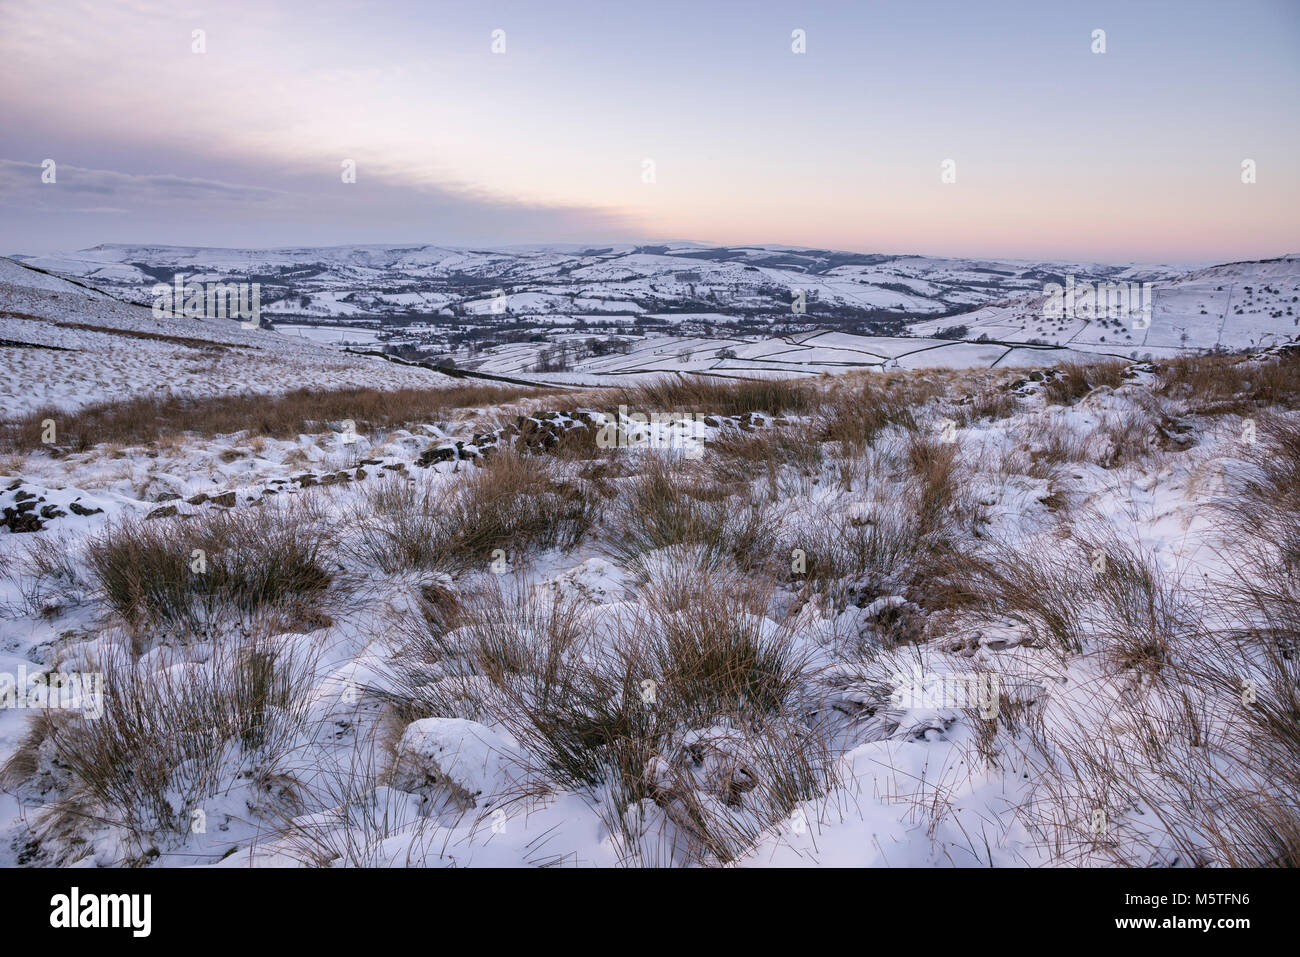 Snowy winter morning in the hills of the Peak District. View towards Chinley and Chapel-en-le-frith. Stock Photo